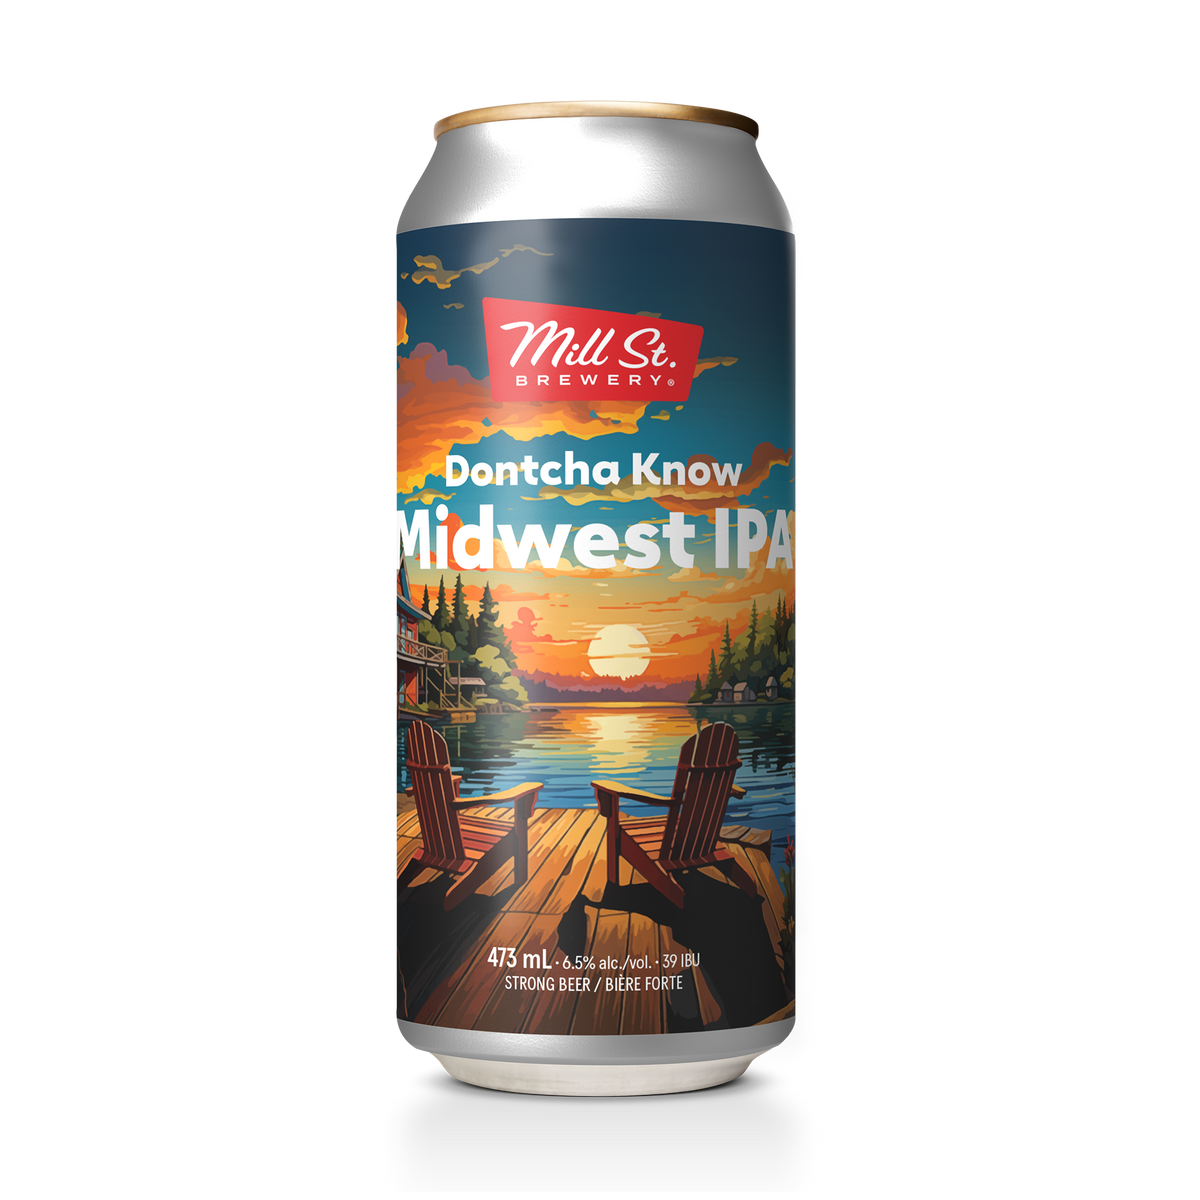 Dontcha Know Midwest IPA